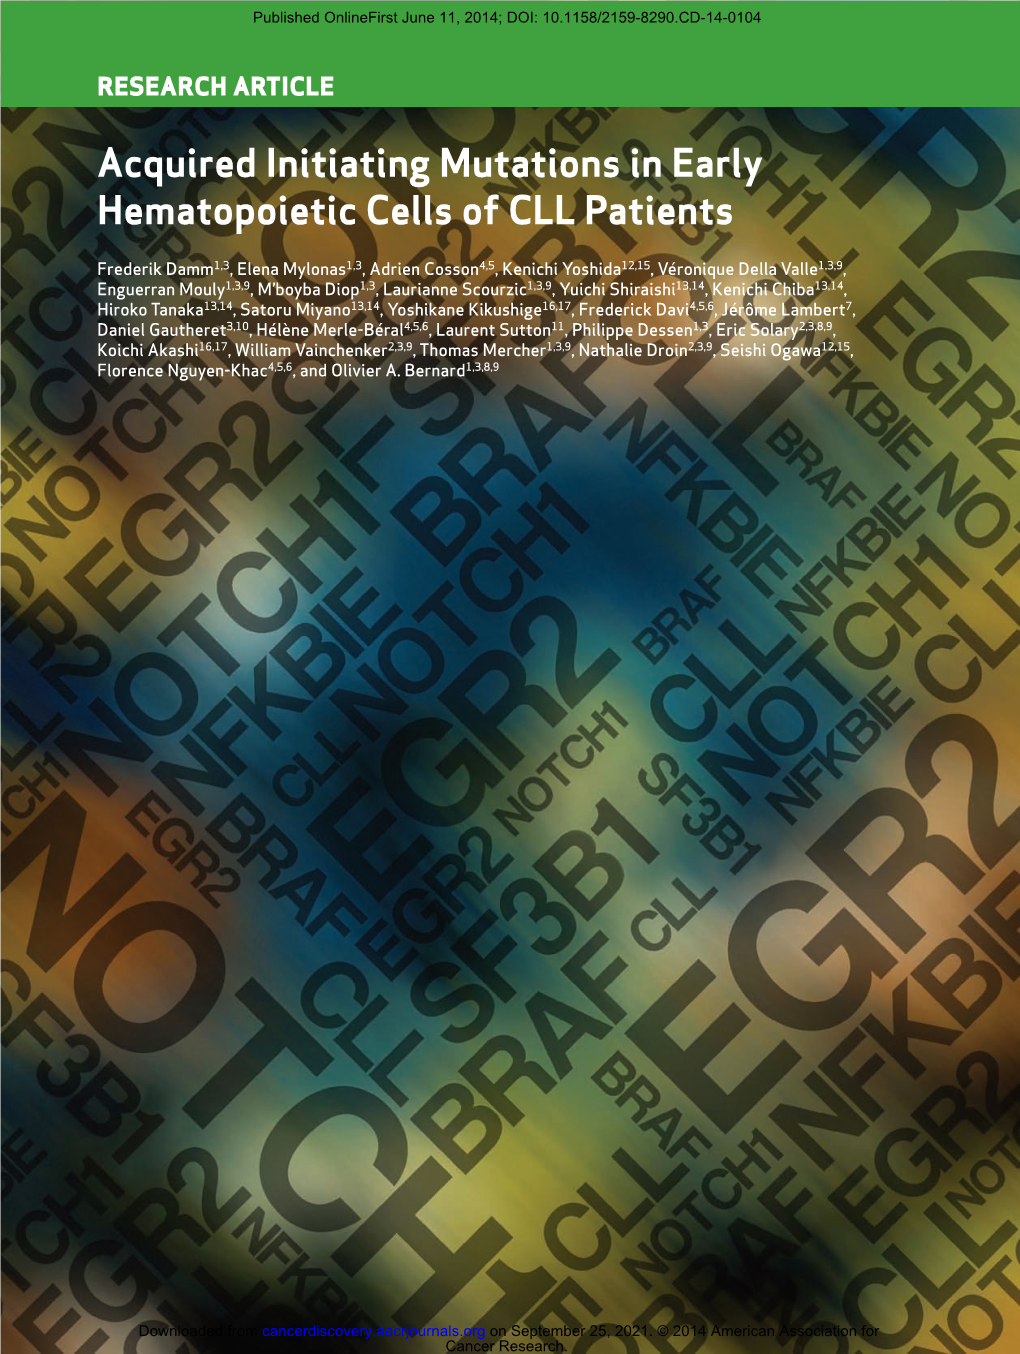 Acquired Initiating Mutations in Early Hematopoietic Cells of CLL Patients